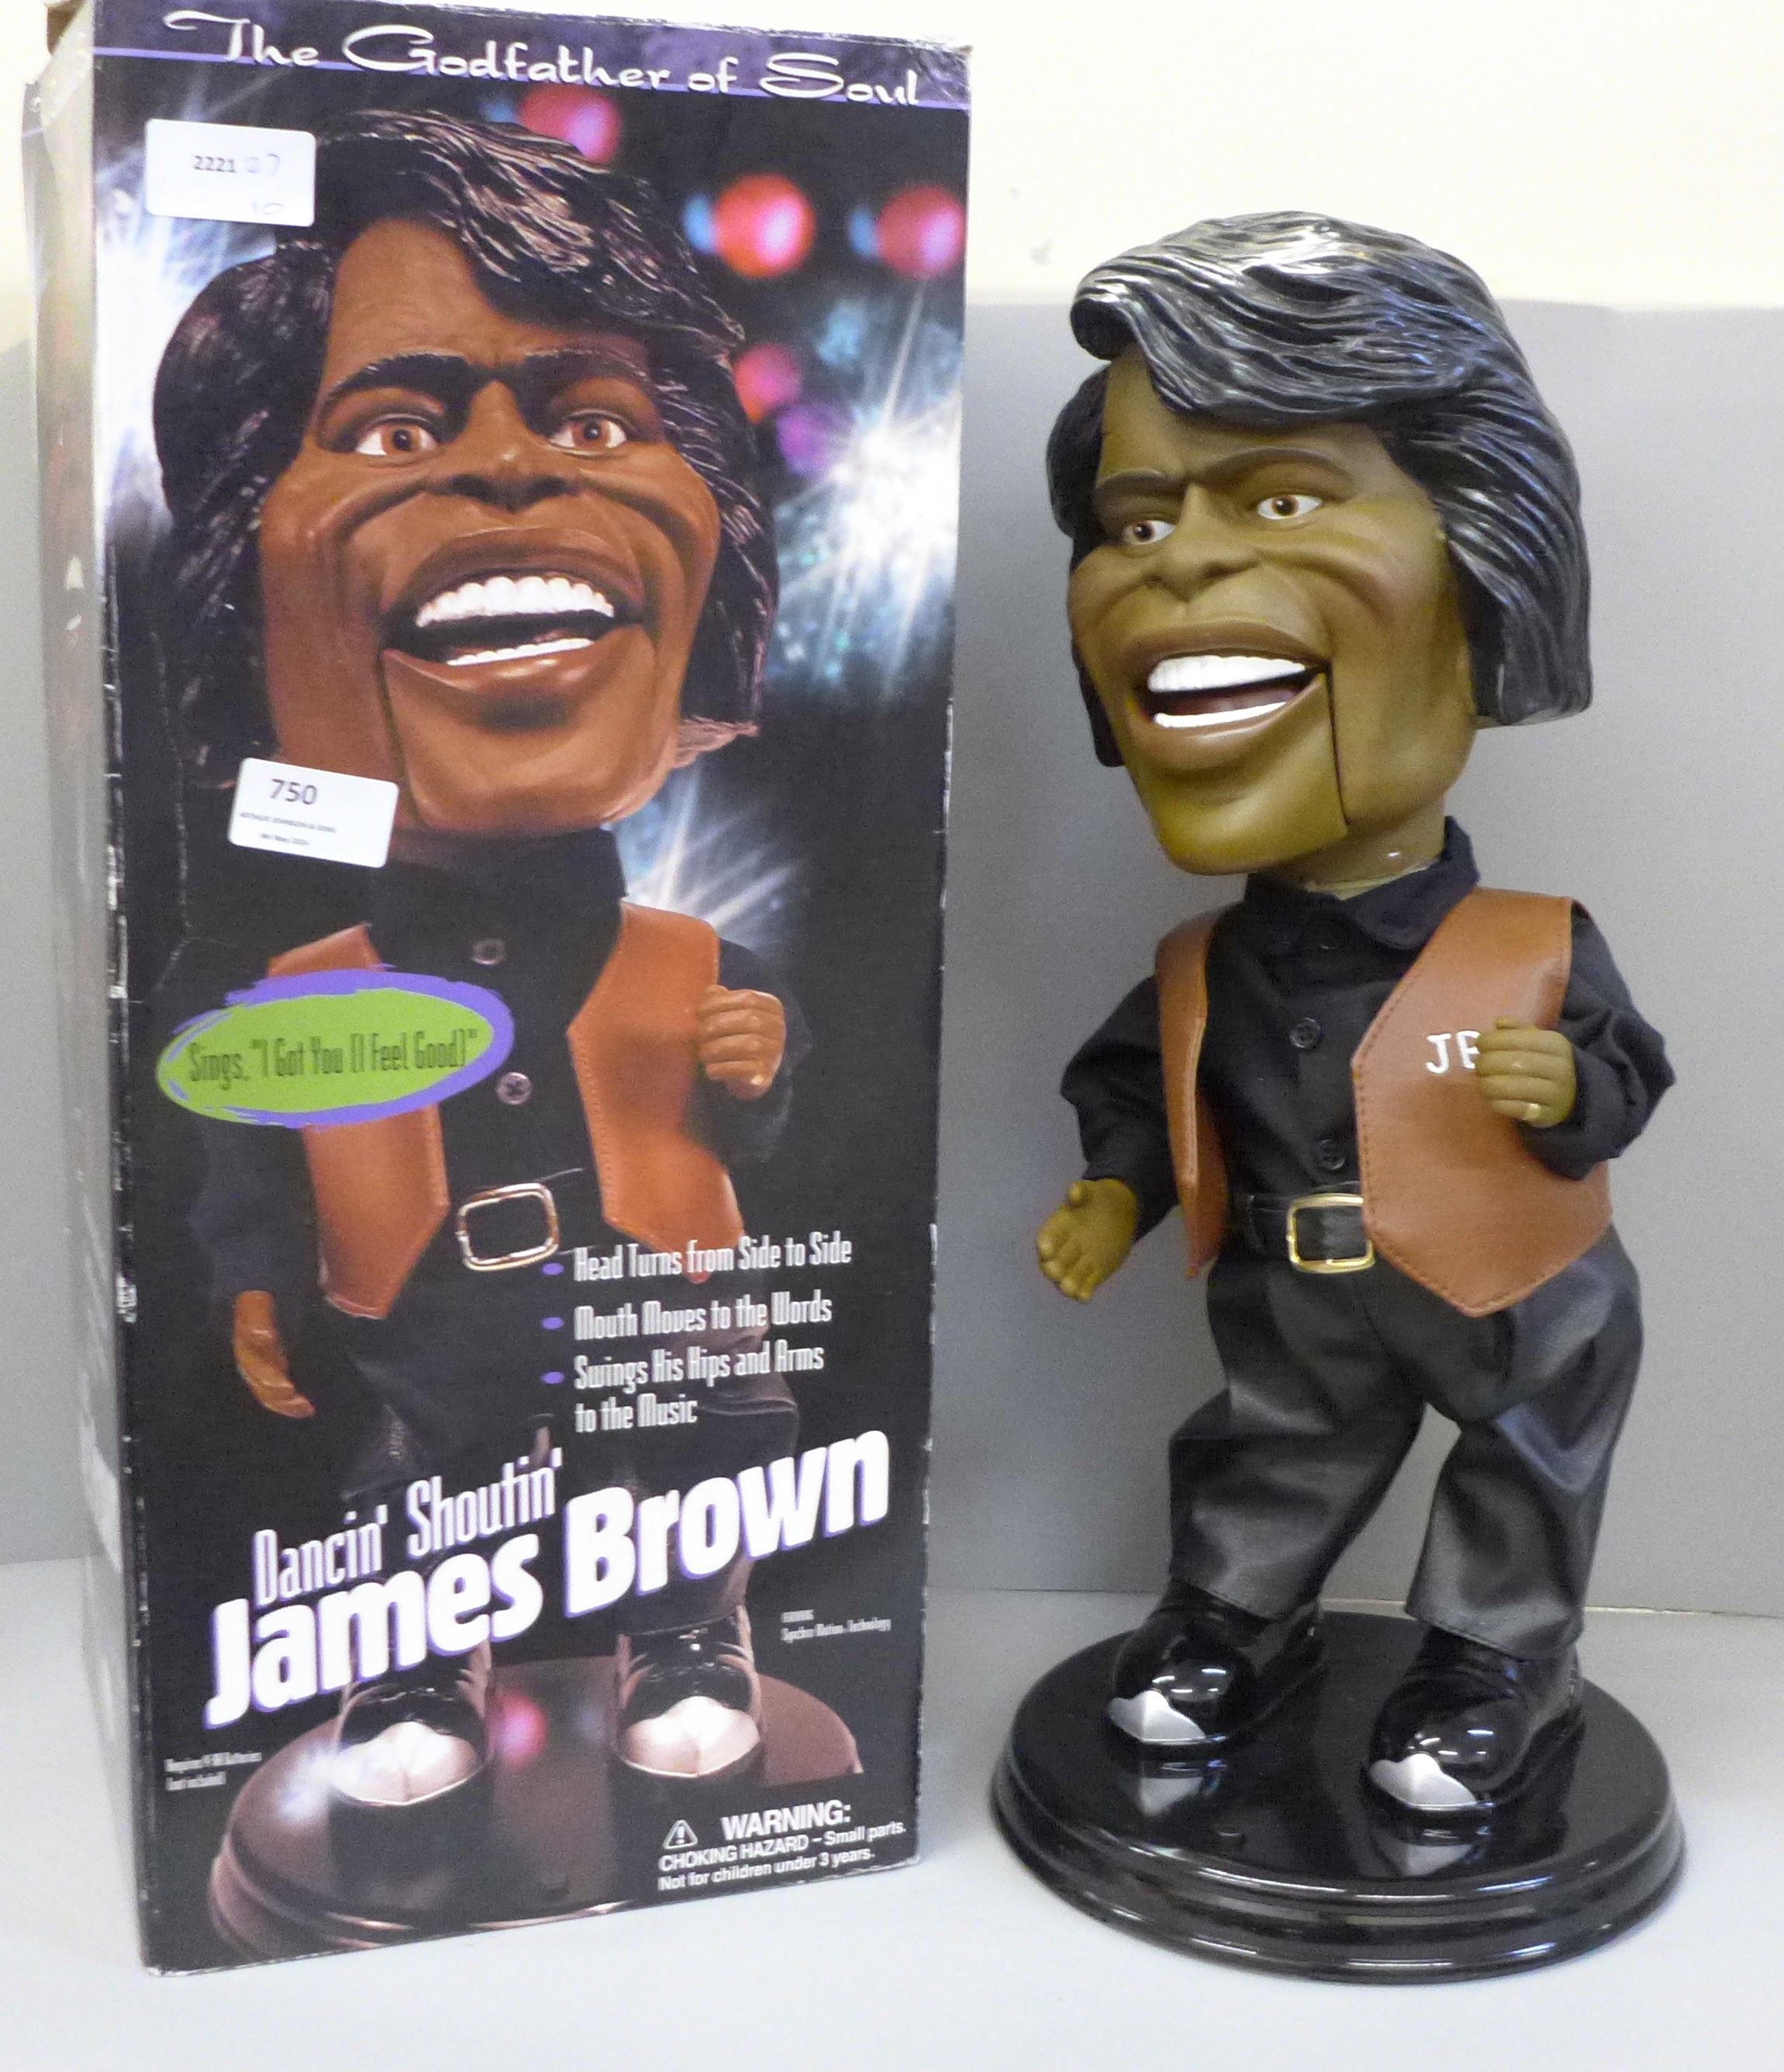 James Brown, Dancin' Shoutin', The Godfather of Soul large model, boxed